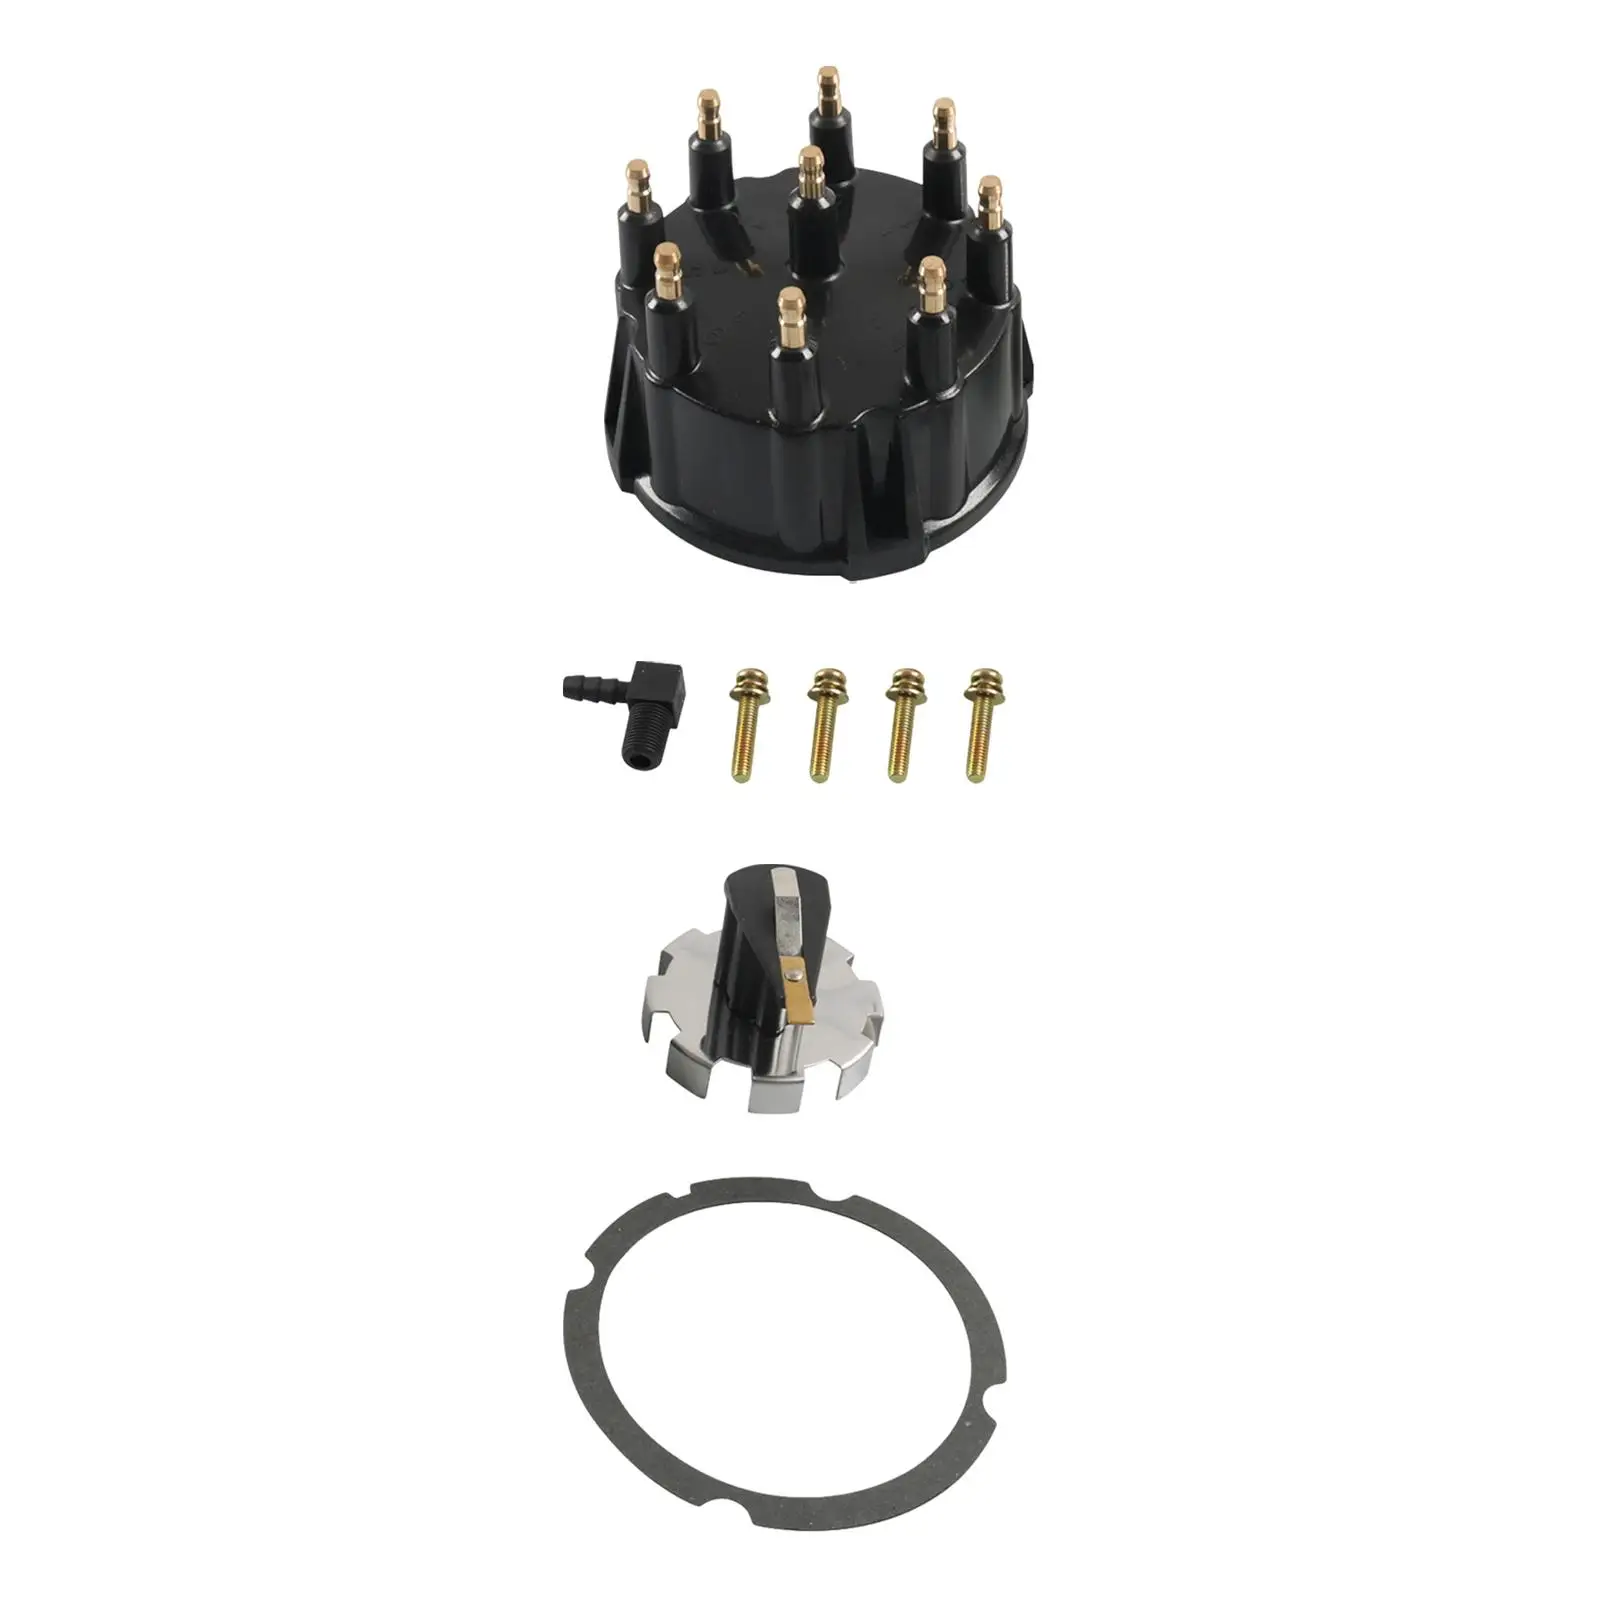 805759Q3 Distributor Cap and Ignition Rotor Set Premium for All 5.0 5.7 7.4 8.2